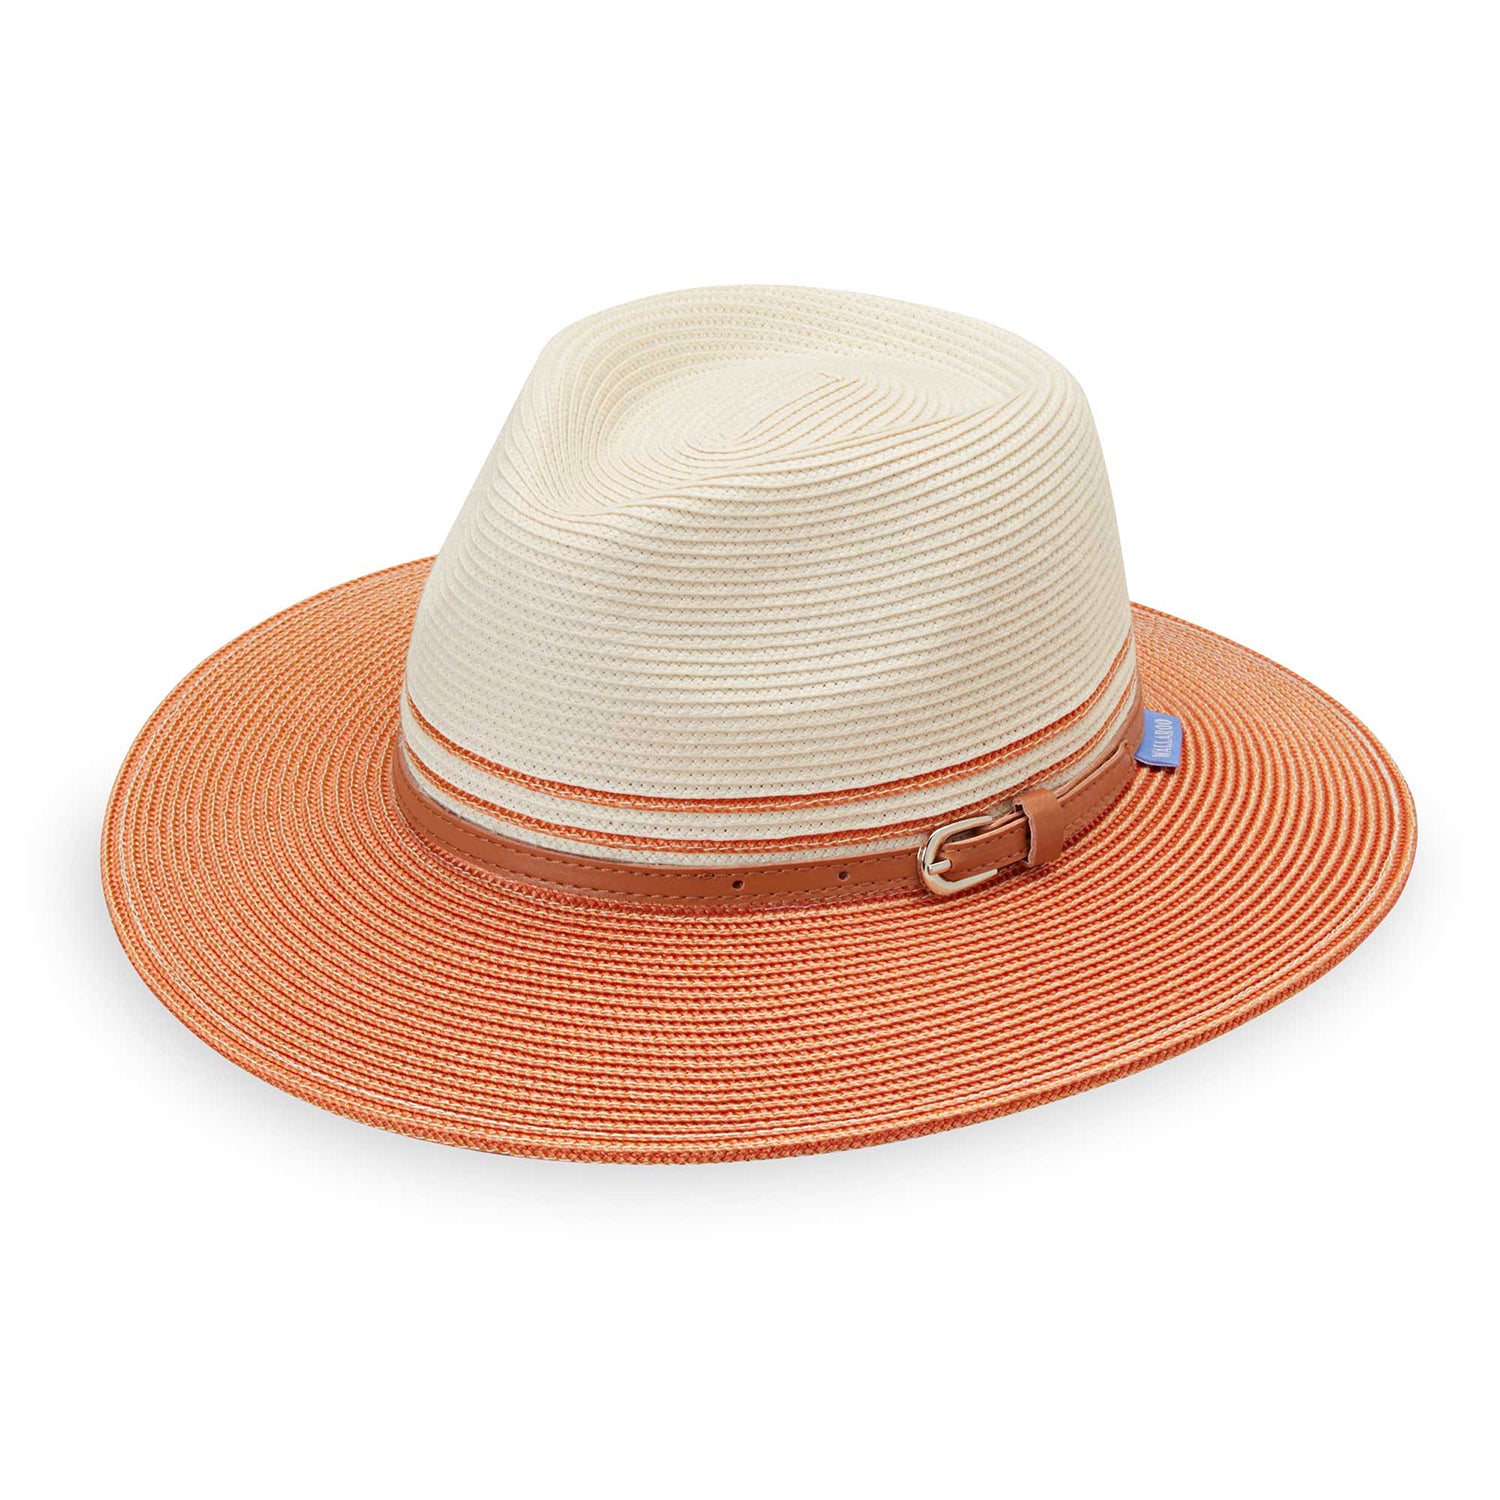 Featuring women's petite fedora sun hat by Wallaroo. Made with packable, UPF 50 material